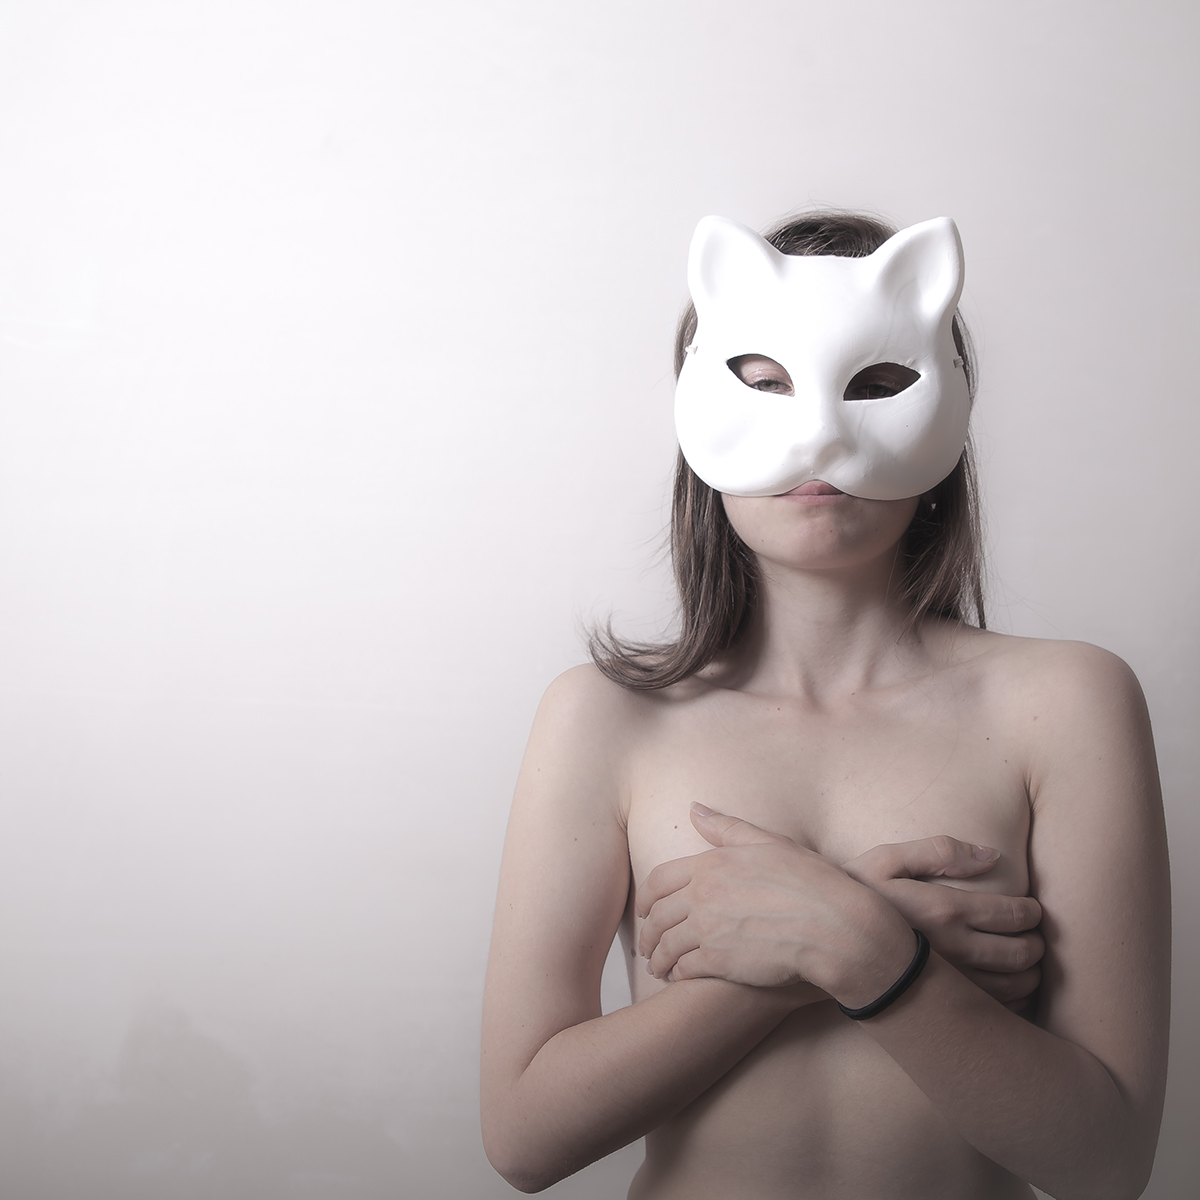 brendan kilbane recommends nudist girl with cat pic